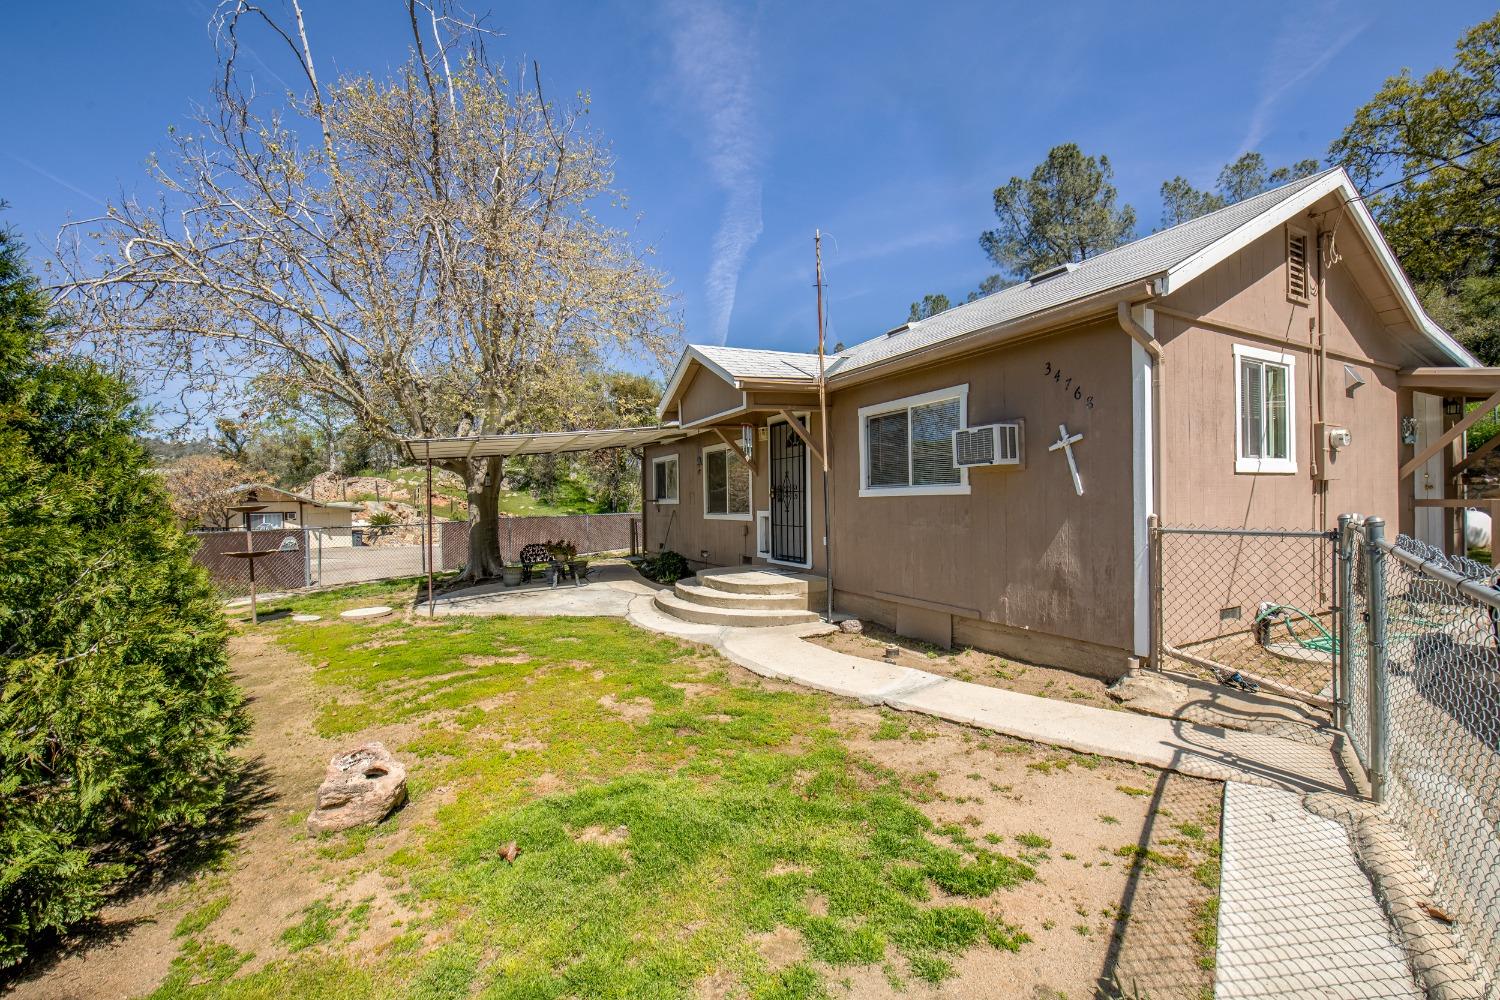 Photo of 34768 Wilson Rd in Auberry, CA